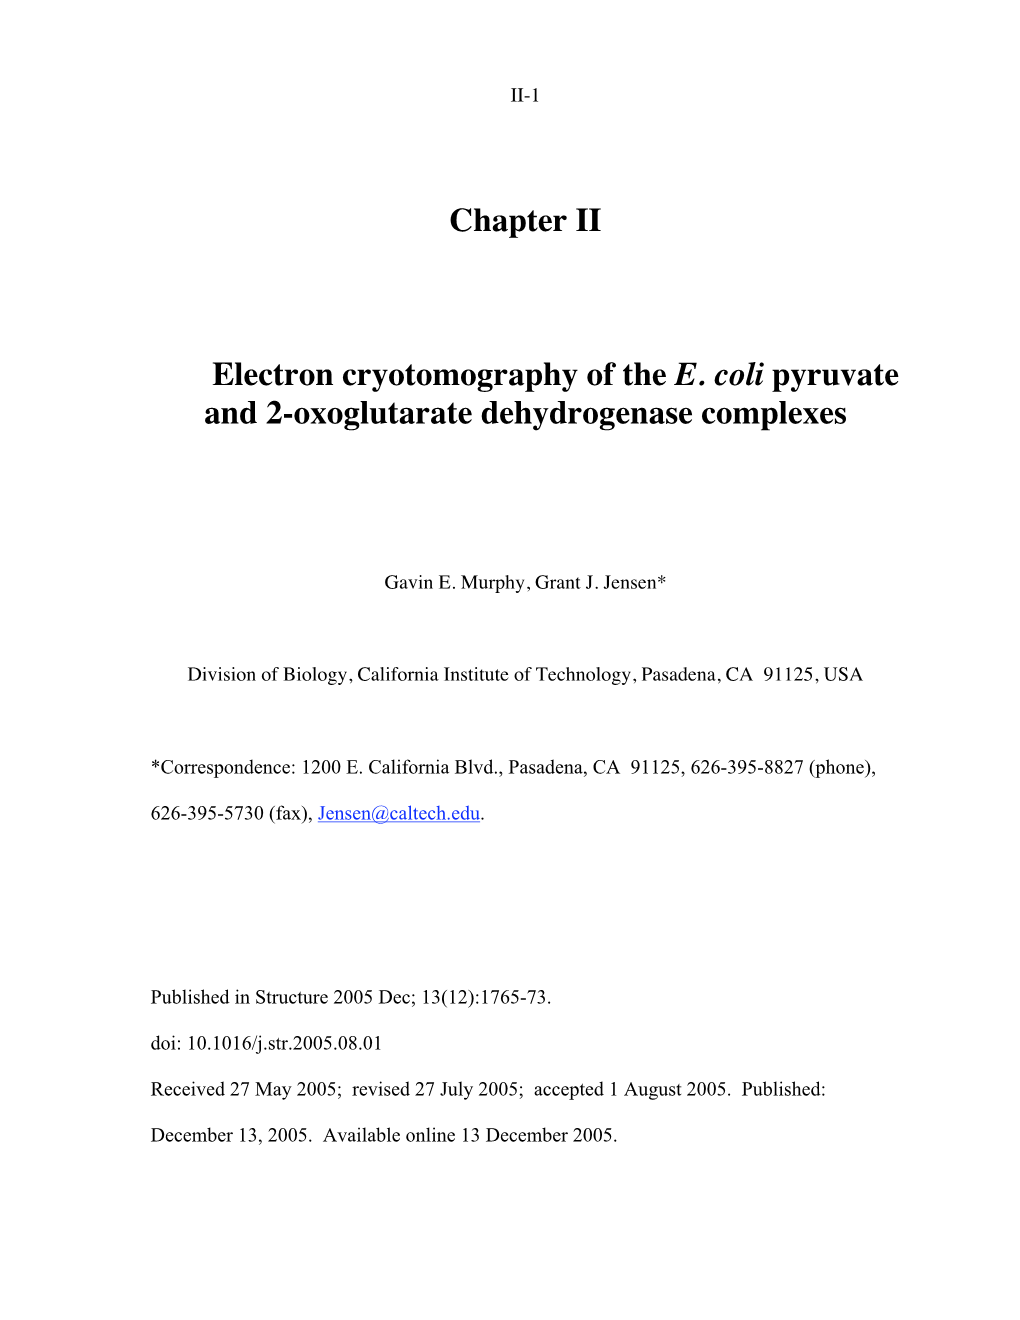 Electron Cryotomography of the E. Coli Pyruvate and 2-Oxoglutarate Dehydrogenase Complexes